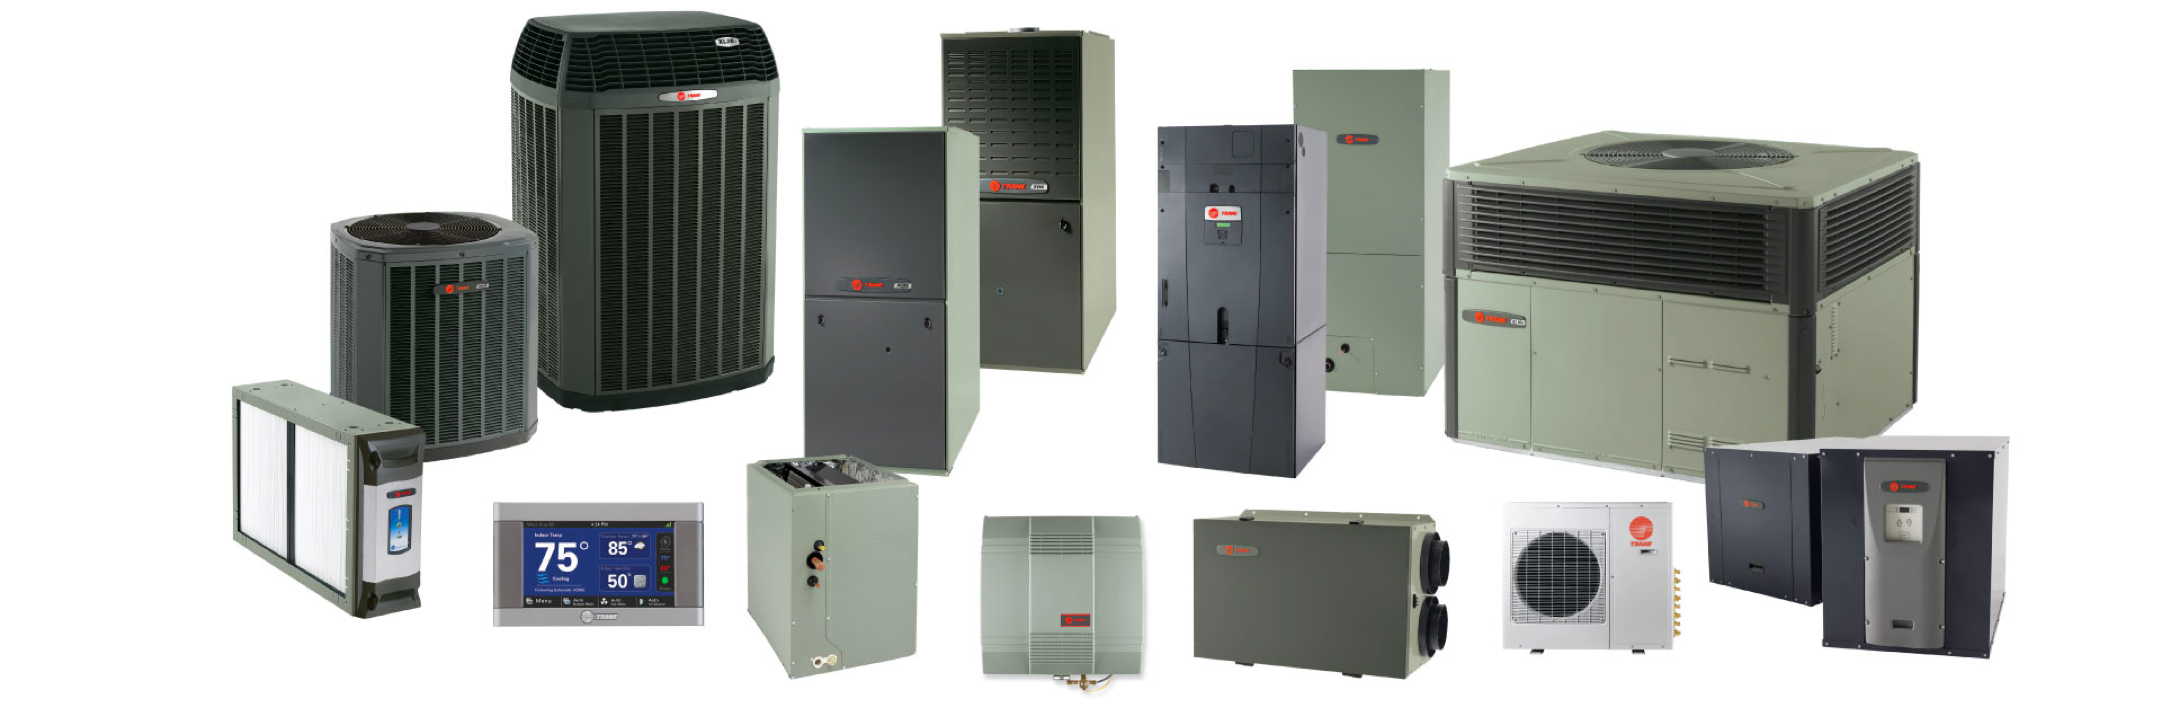 Trane Products